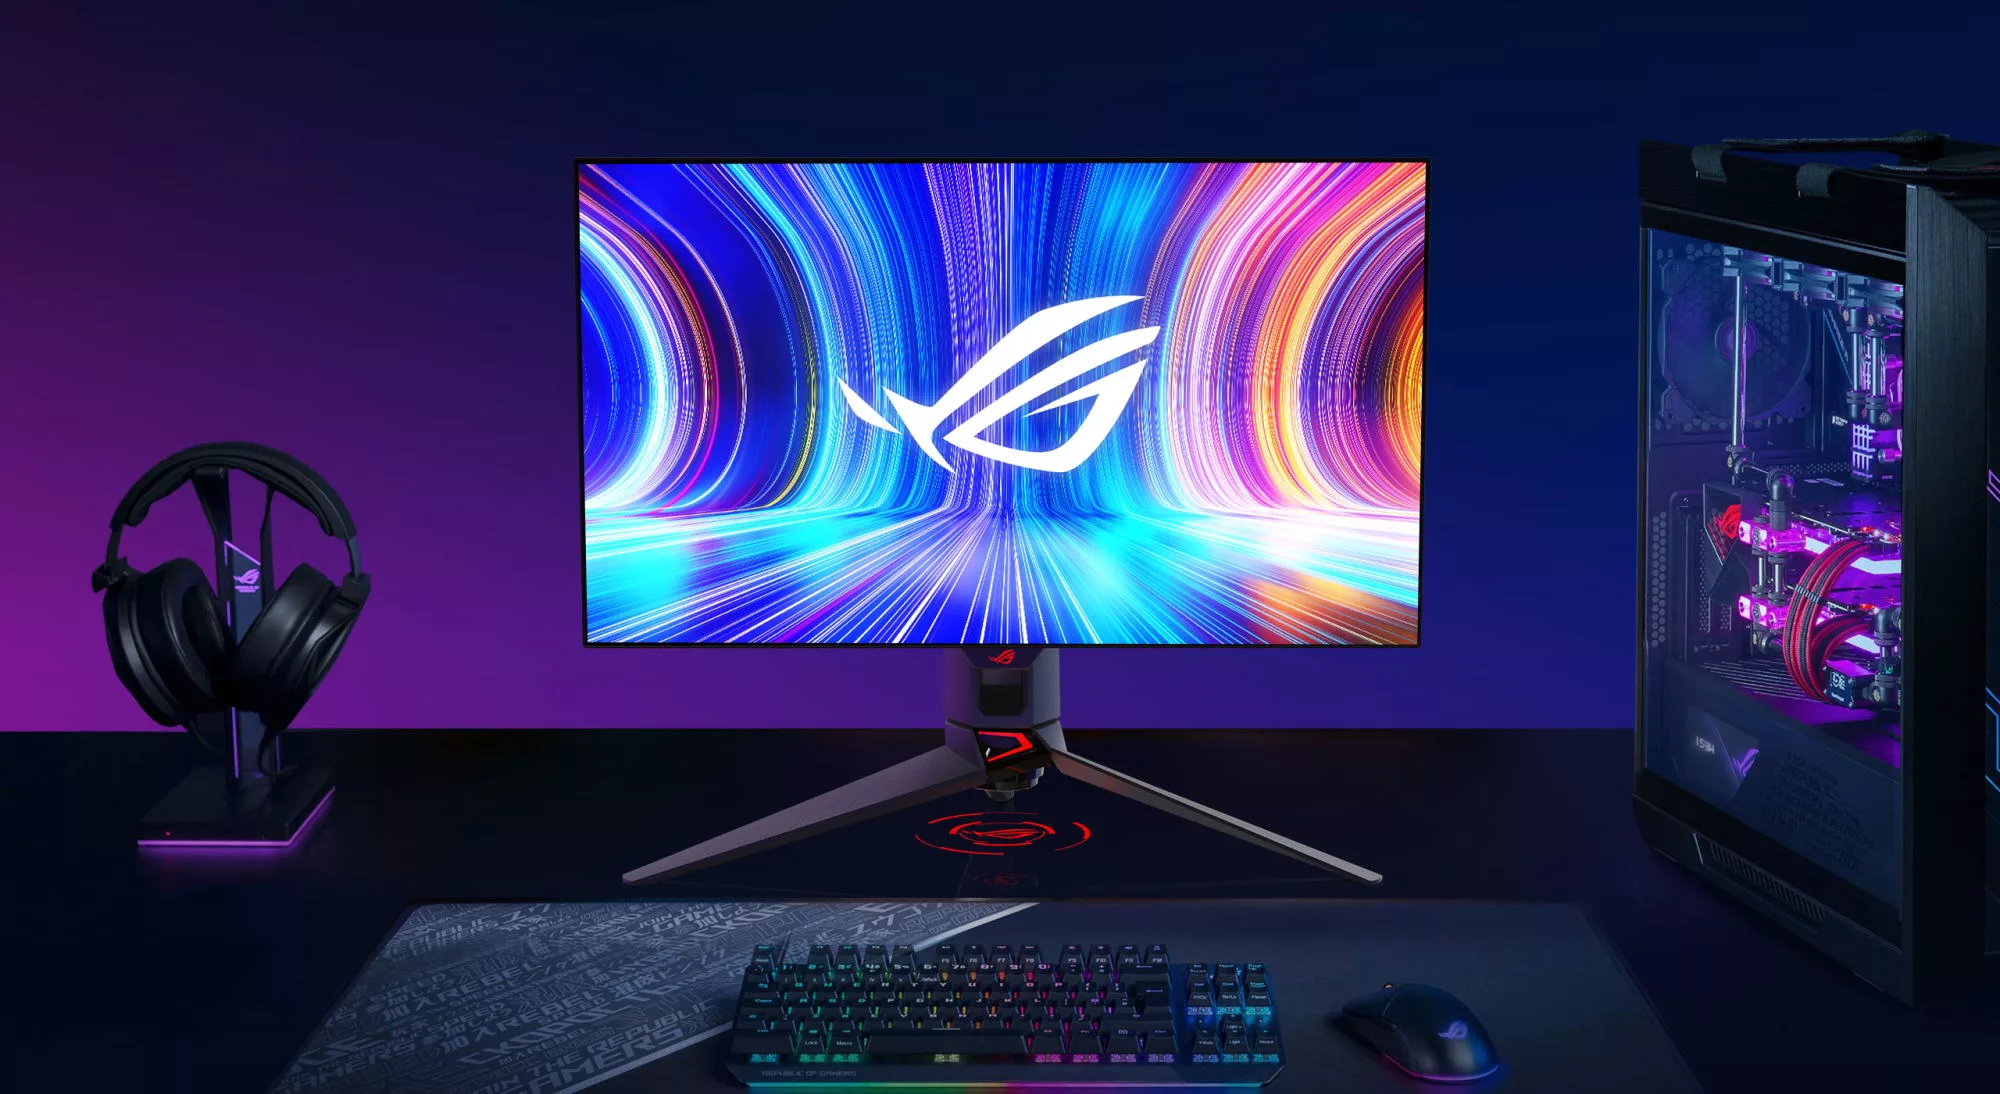 Asus and Dell both launch 500Hz monitors at CES 2023